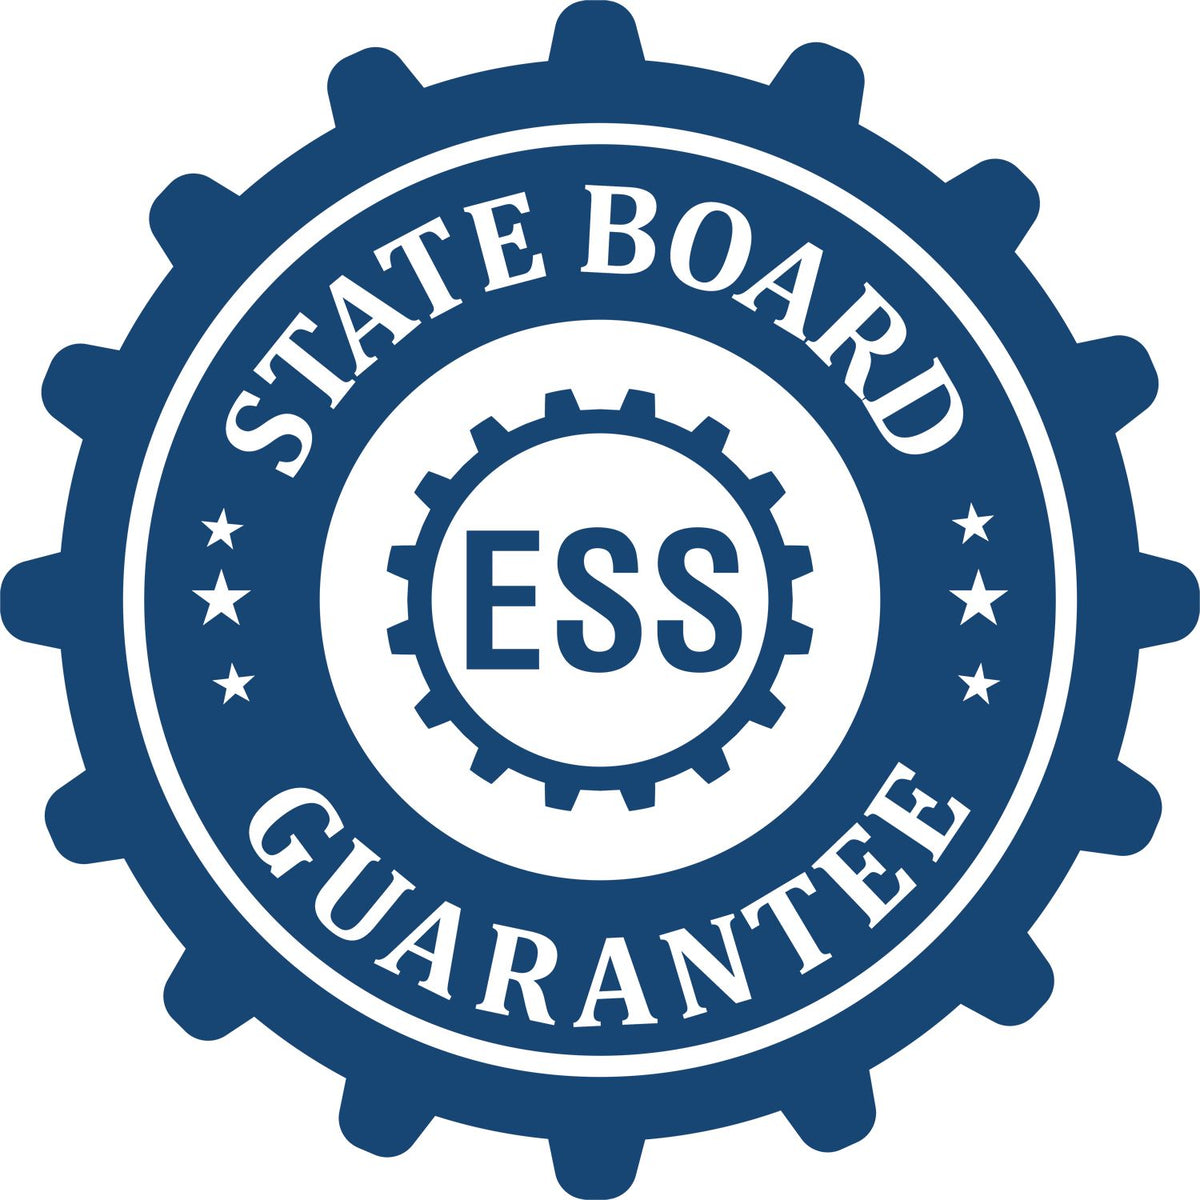 An emblem in a gear shape illustrating a state board guarantee for the West Virginia Landscape Architectural Seal Stamp product.